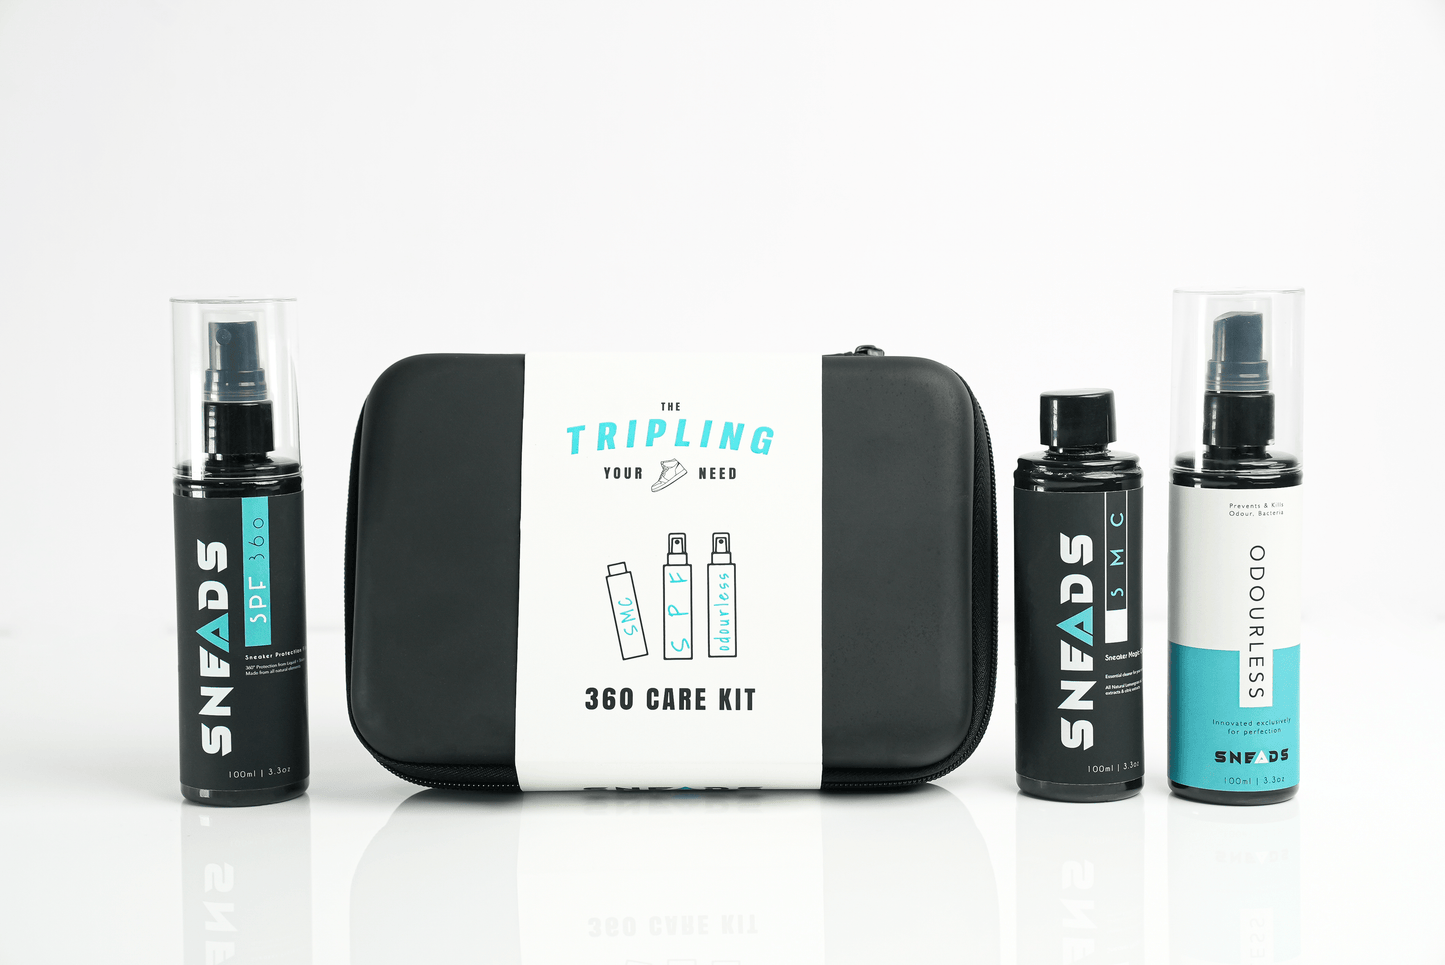 The 360 Care Kit